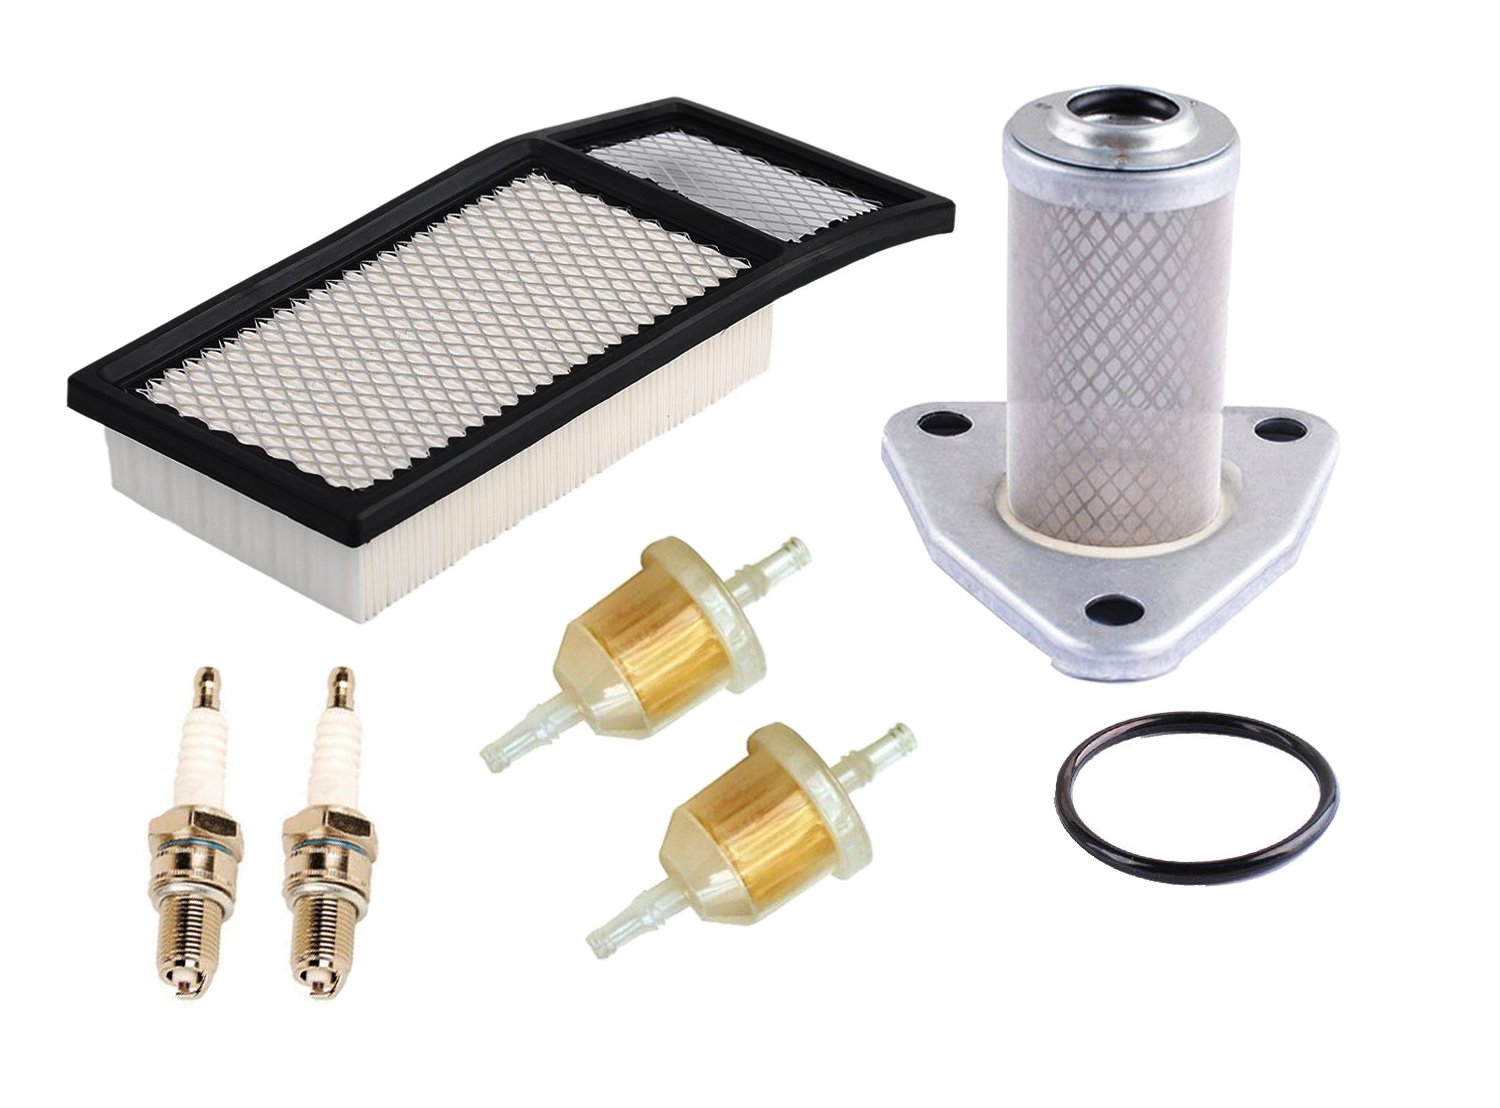 OxoxO 72368G01 Air Filter 26591G01 Oil Filter 72084-G01 Fuel Filter Spark Plug Kit Compatible with EZGO TXT, MEDALIST 4 Cycle 295cc/350cc Golf Cart 1994-2005 Replacement Parts von OxoxO